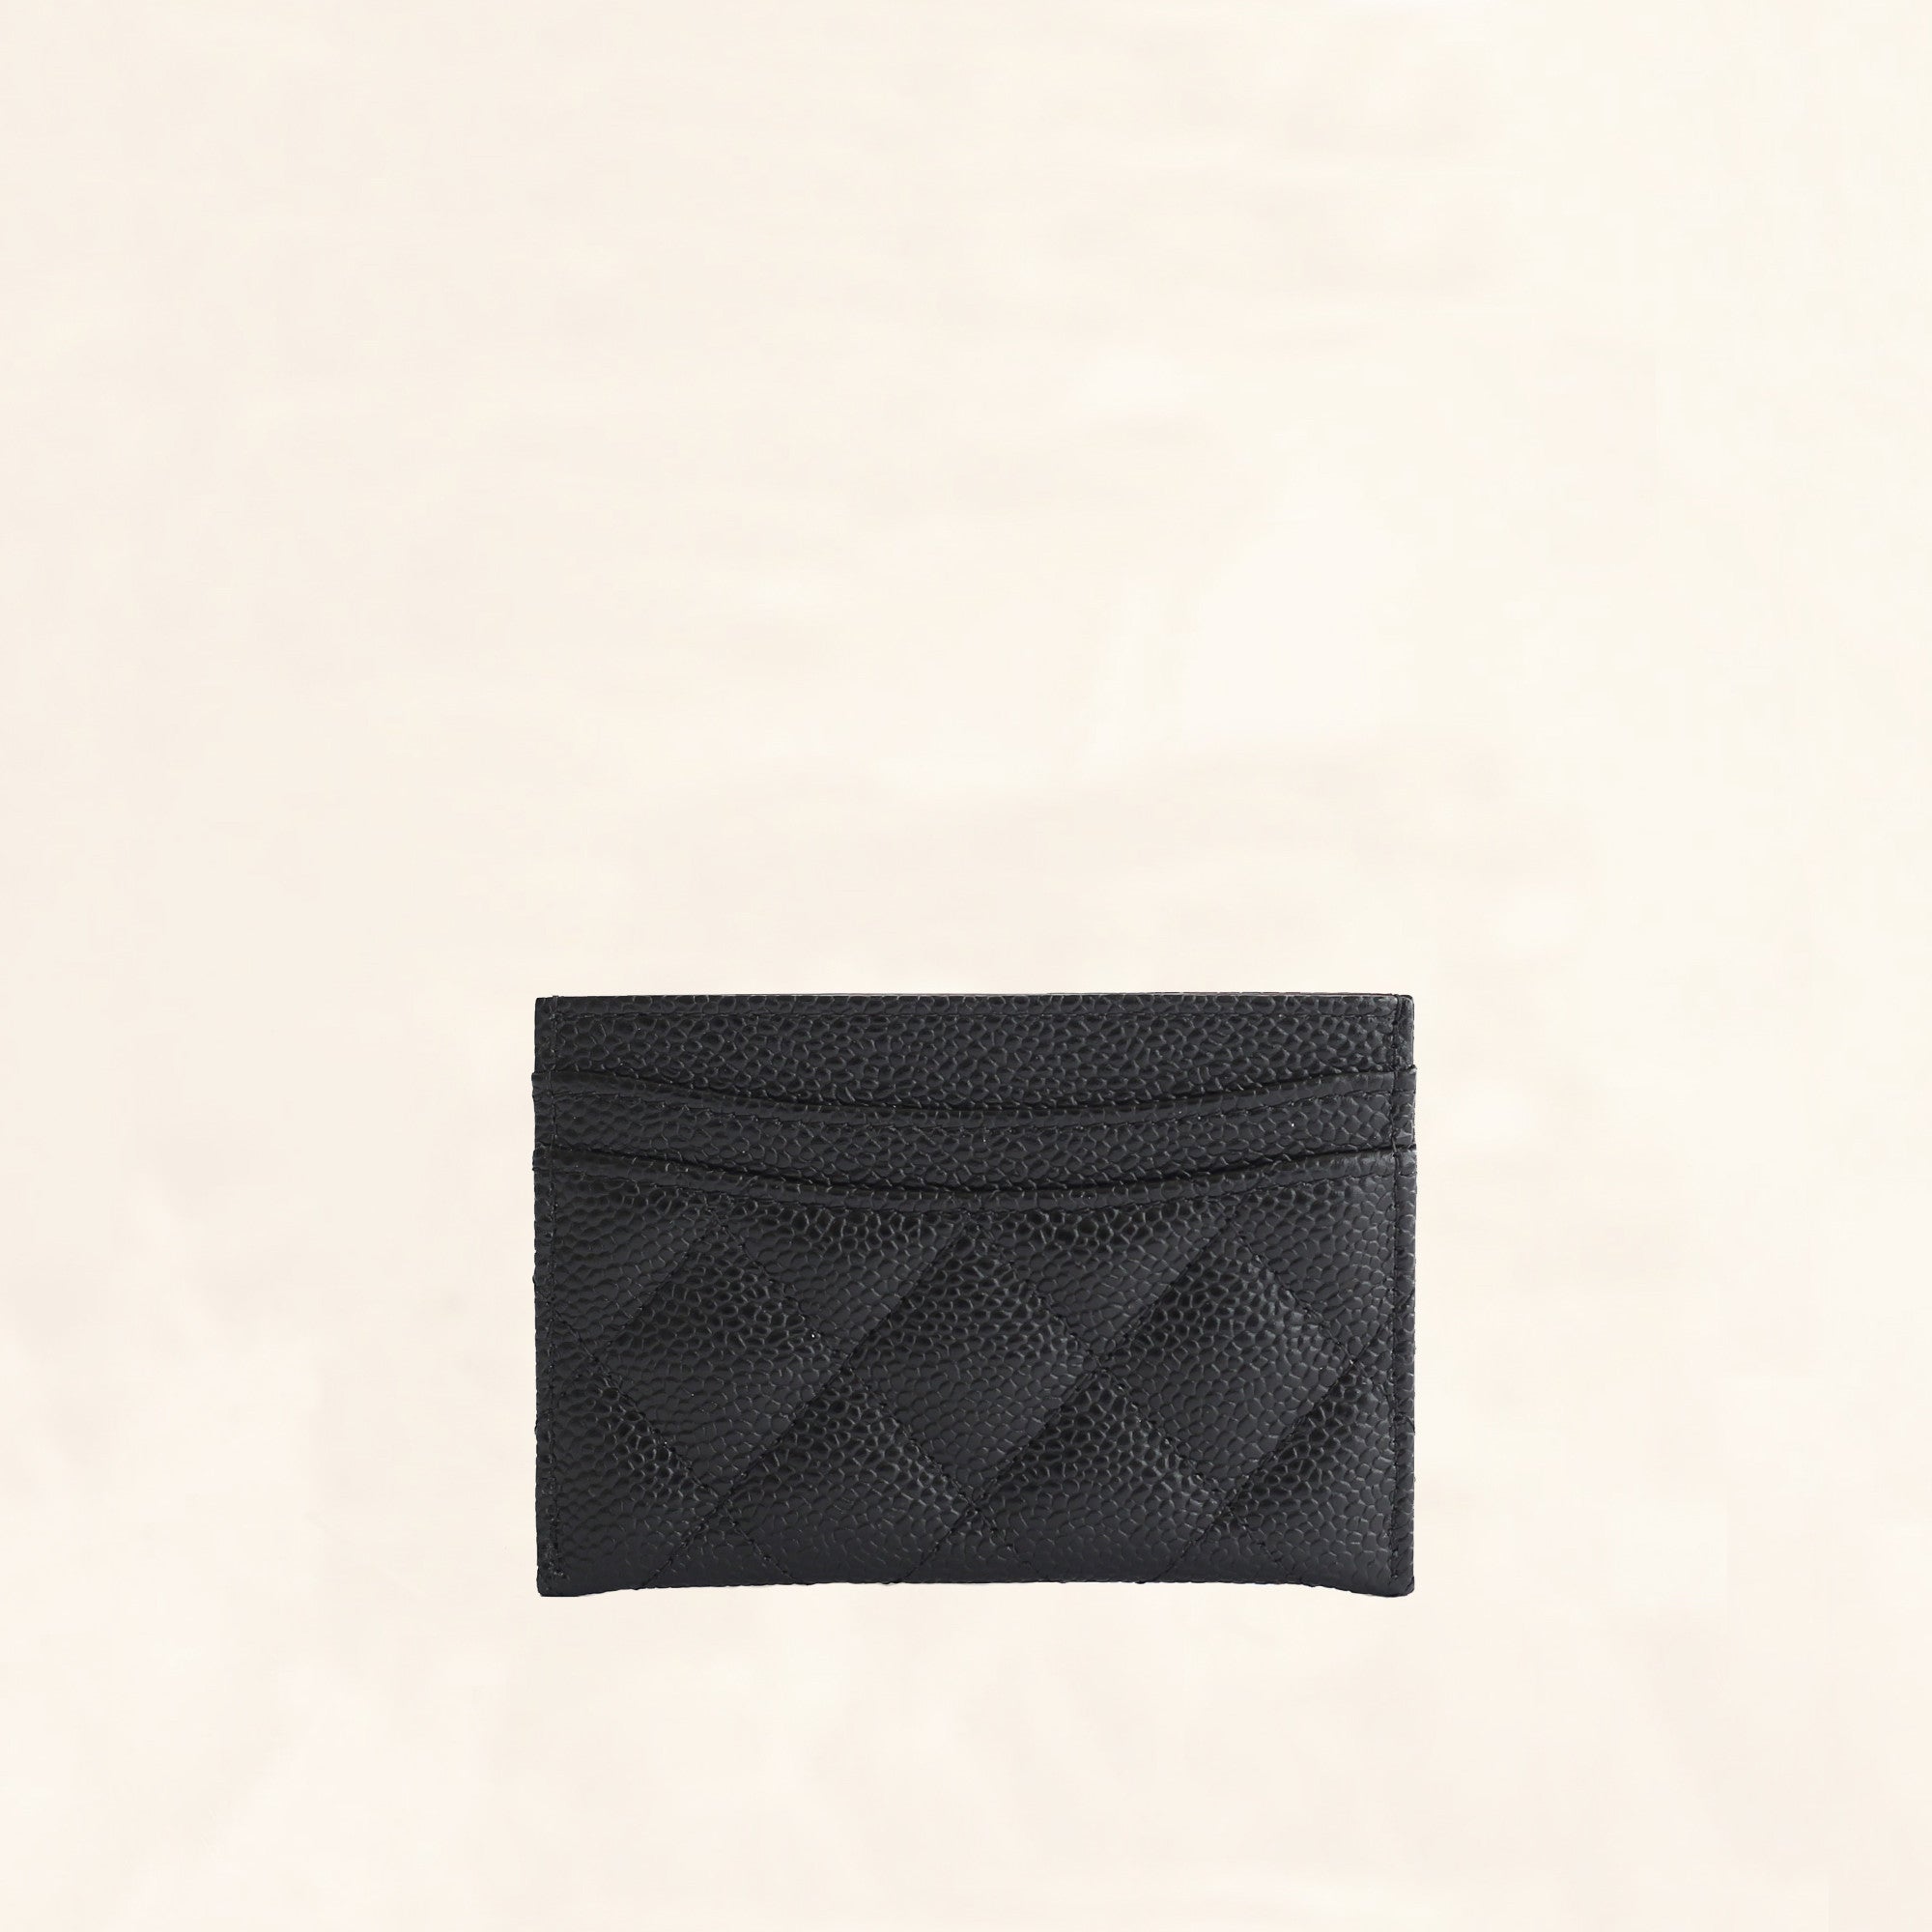 Chanel, Caviar Card Holder with SHW